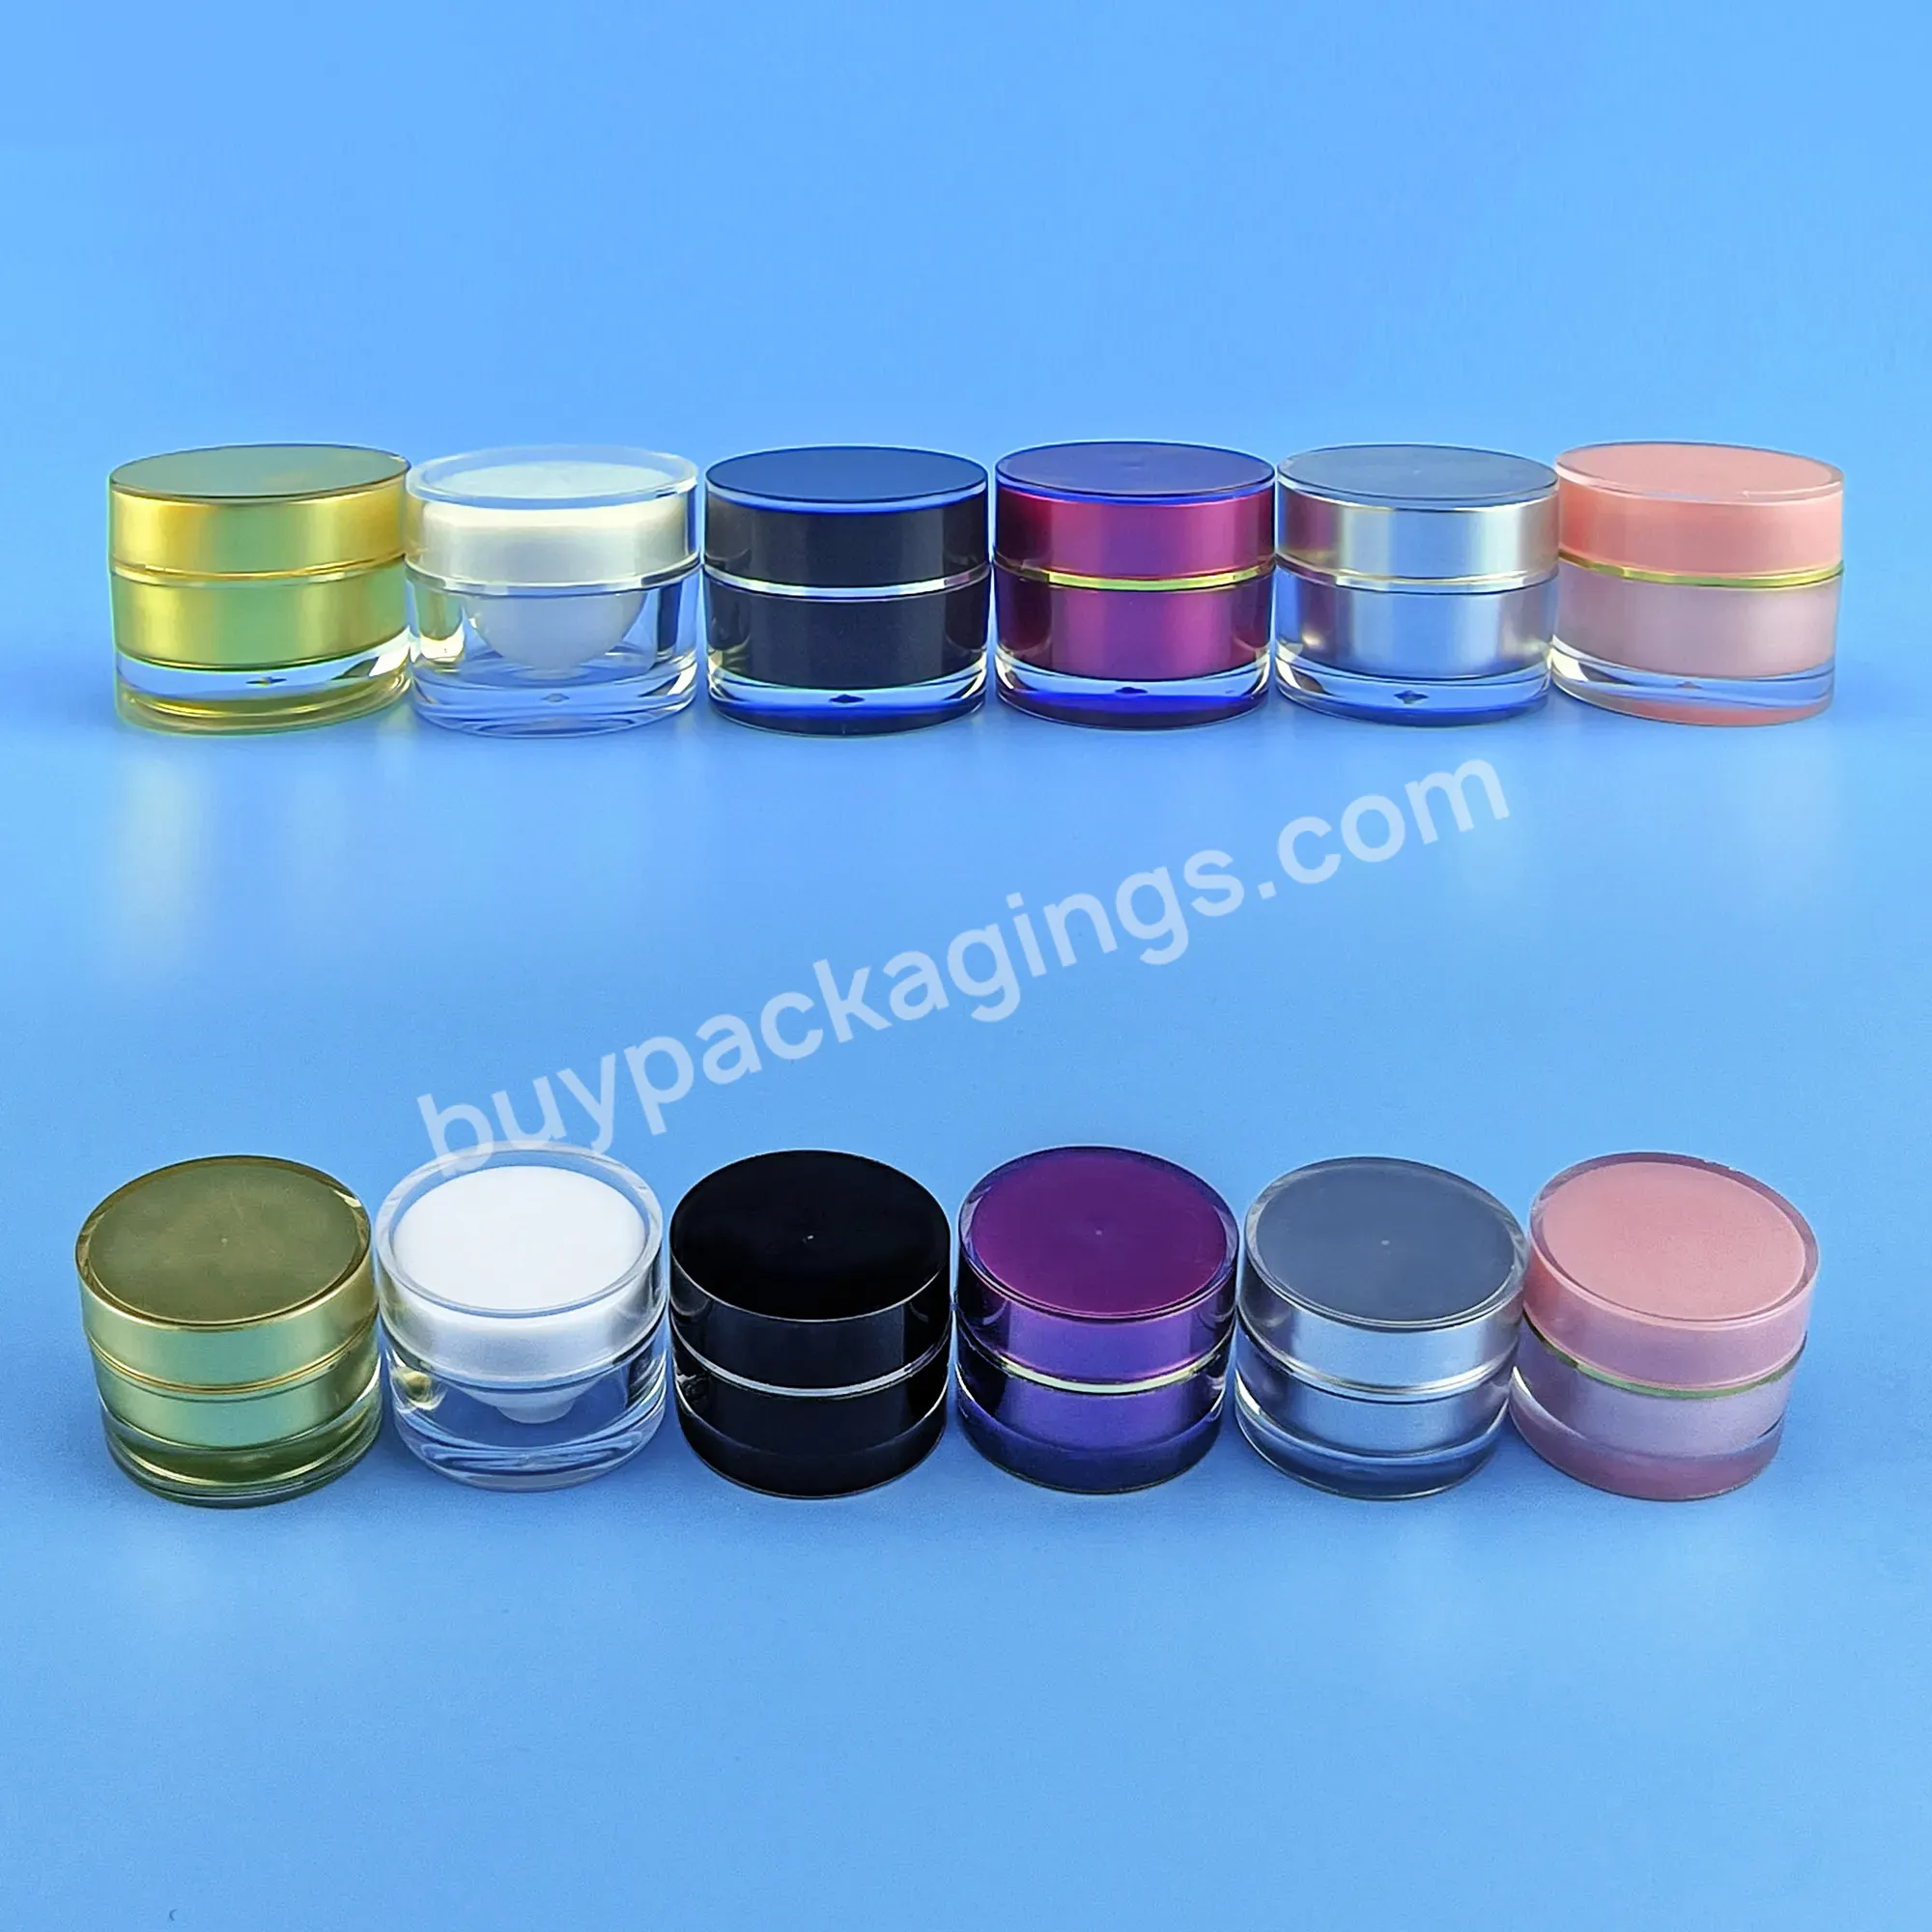 Clear Ps Plastic Cosmetic Cream Jar Lip Scrub Pink Gold Lids Acrylic Powder Jars Lip Balm Container 5g 10g 15g 20g 30g 50g - Buy 5g 10g 15g 20g 30g 50g Cream Jar Plastic Cream Jar With Lid,Empty Ps Lip Scrub Container Frosted Matte Face Mask Containe